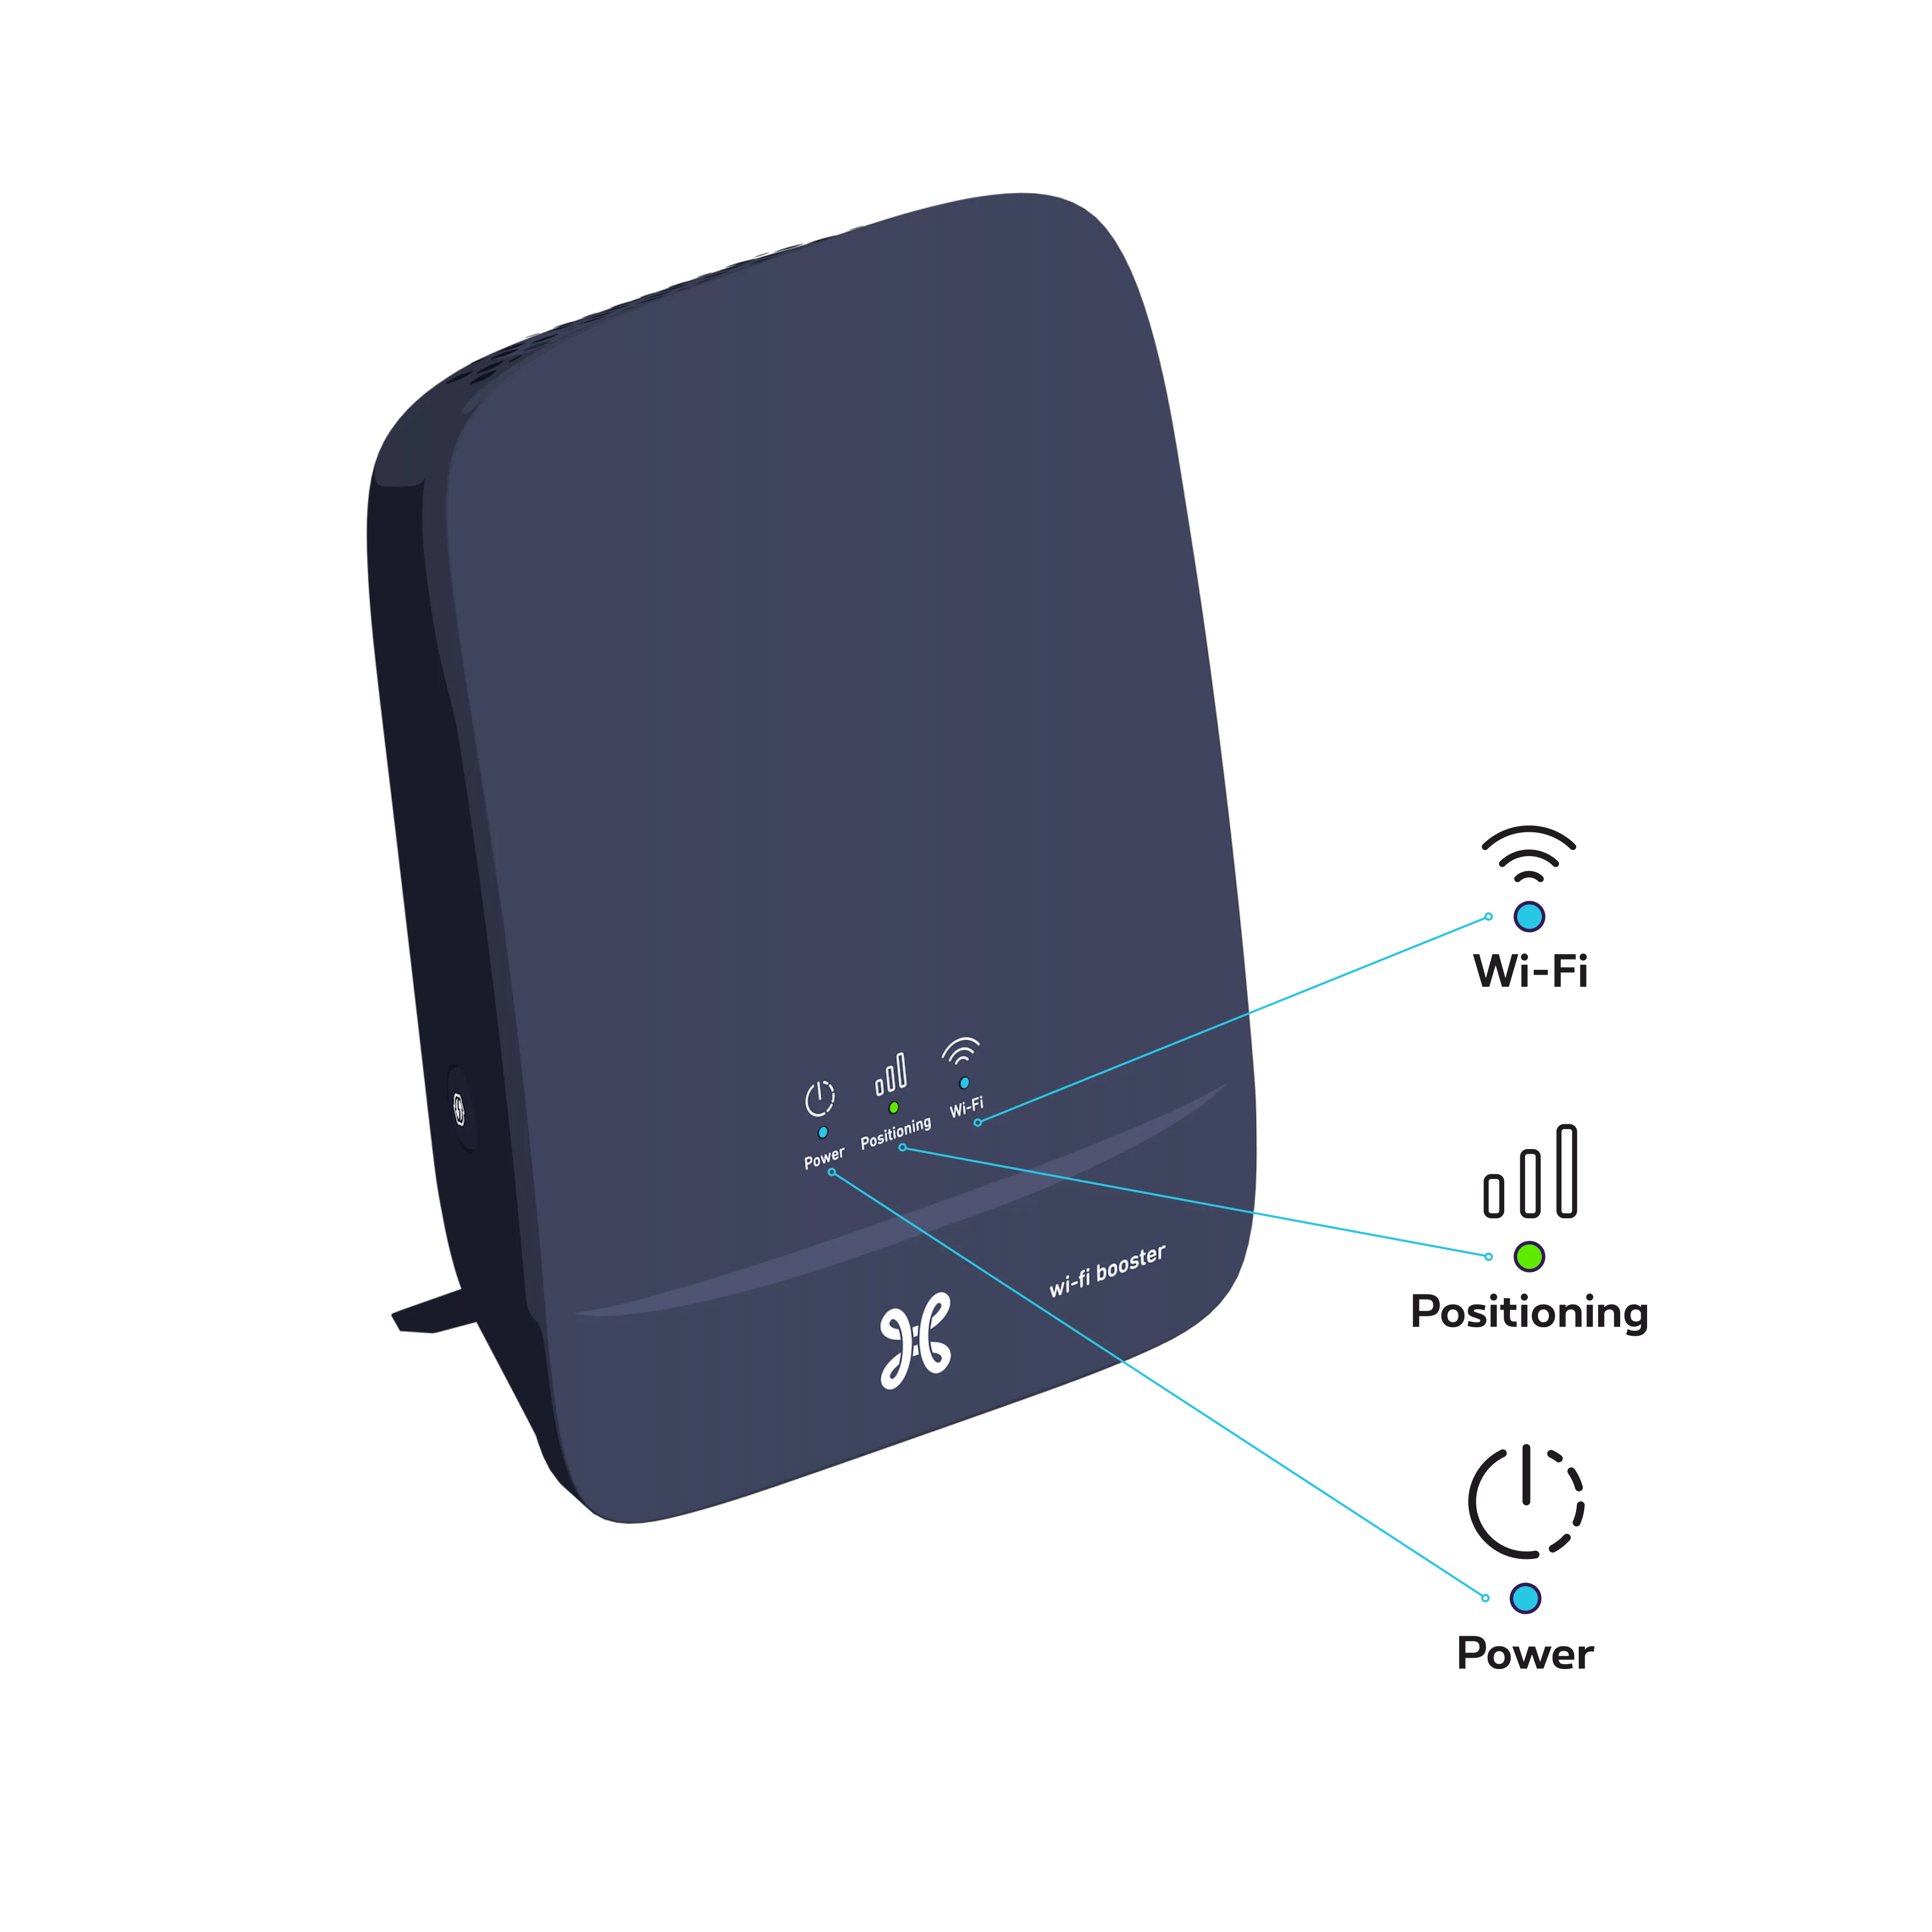 Wi-Fi Booster - Guide d'installation